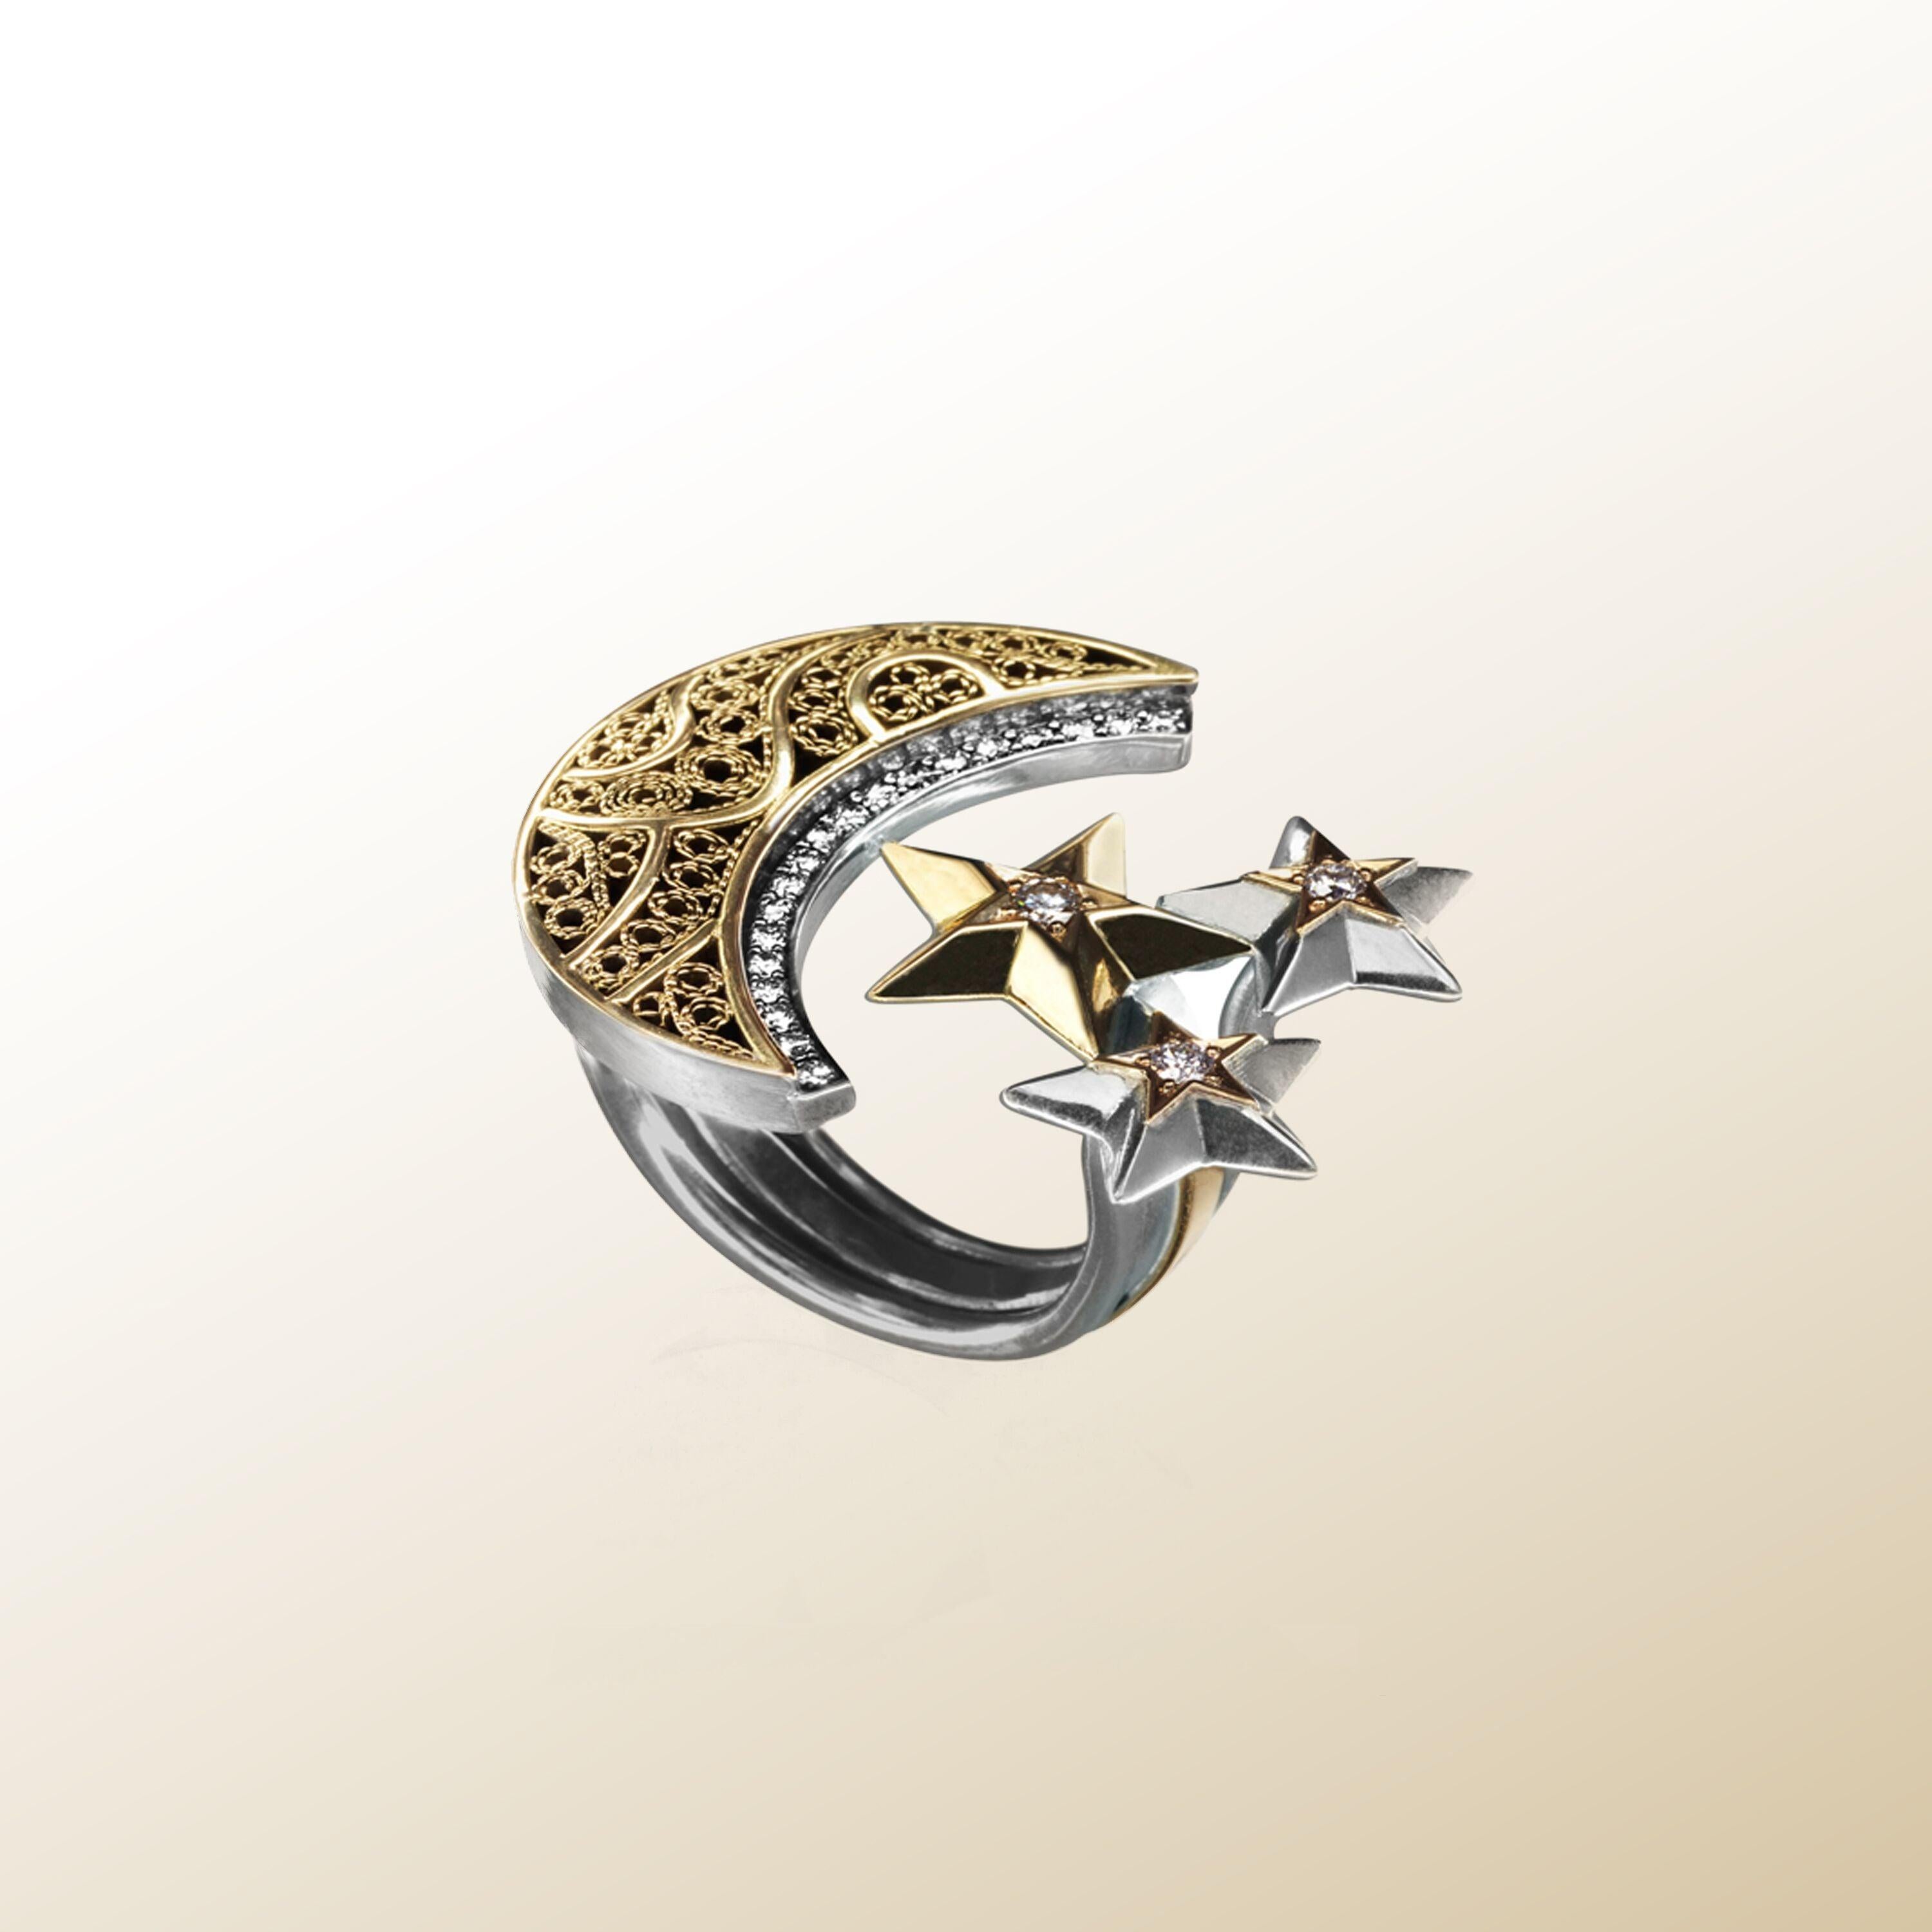 For Sale:  18 Karat Gold, Sterling Silver and Diamond Filigree Crescent Moon and Stars Ring 3